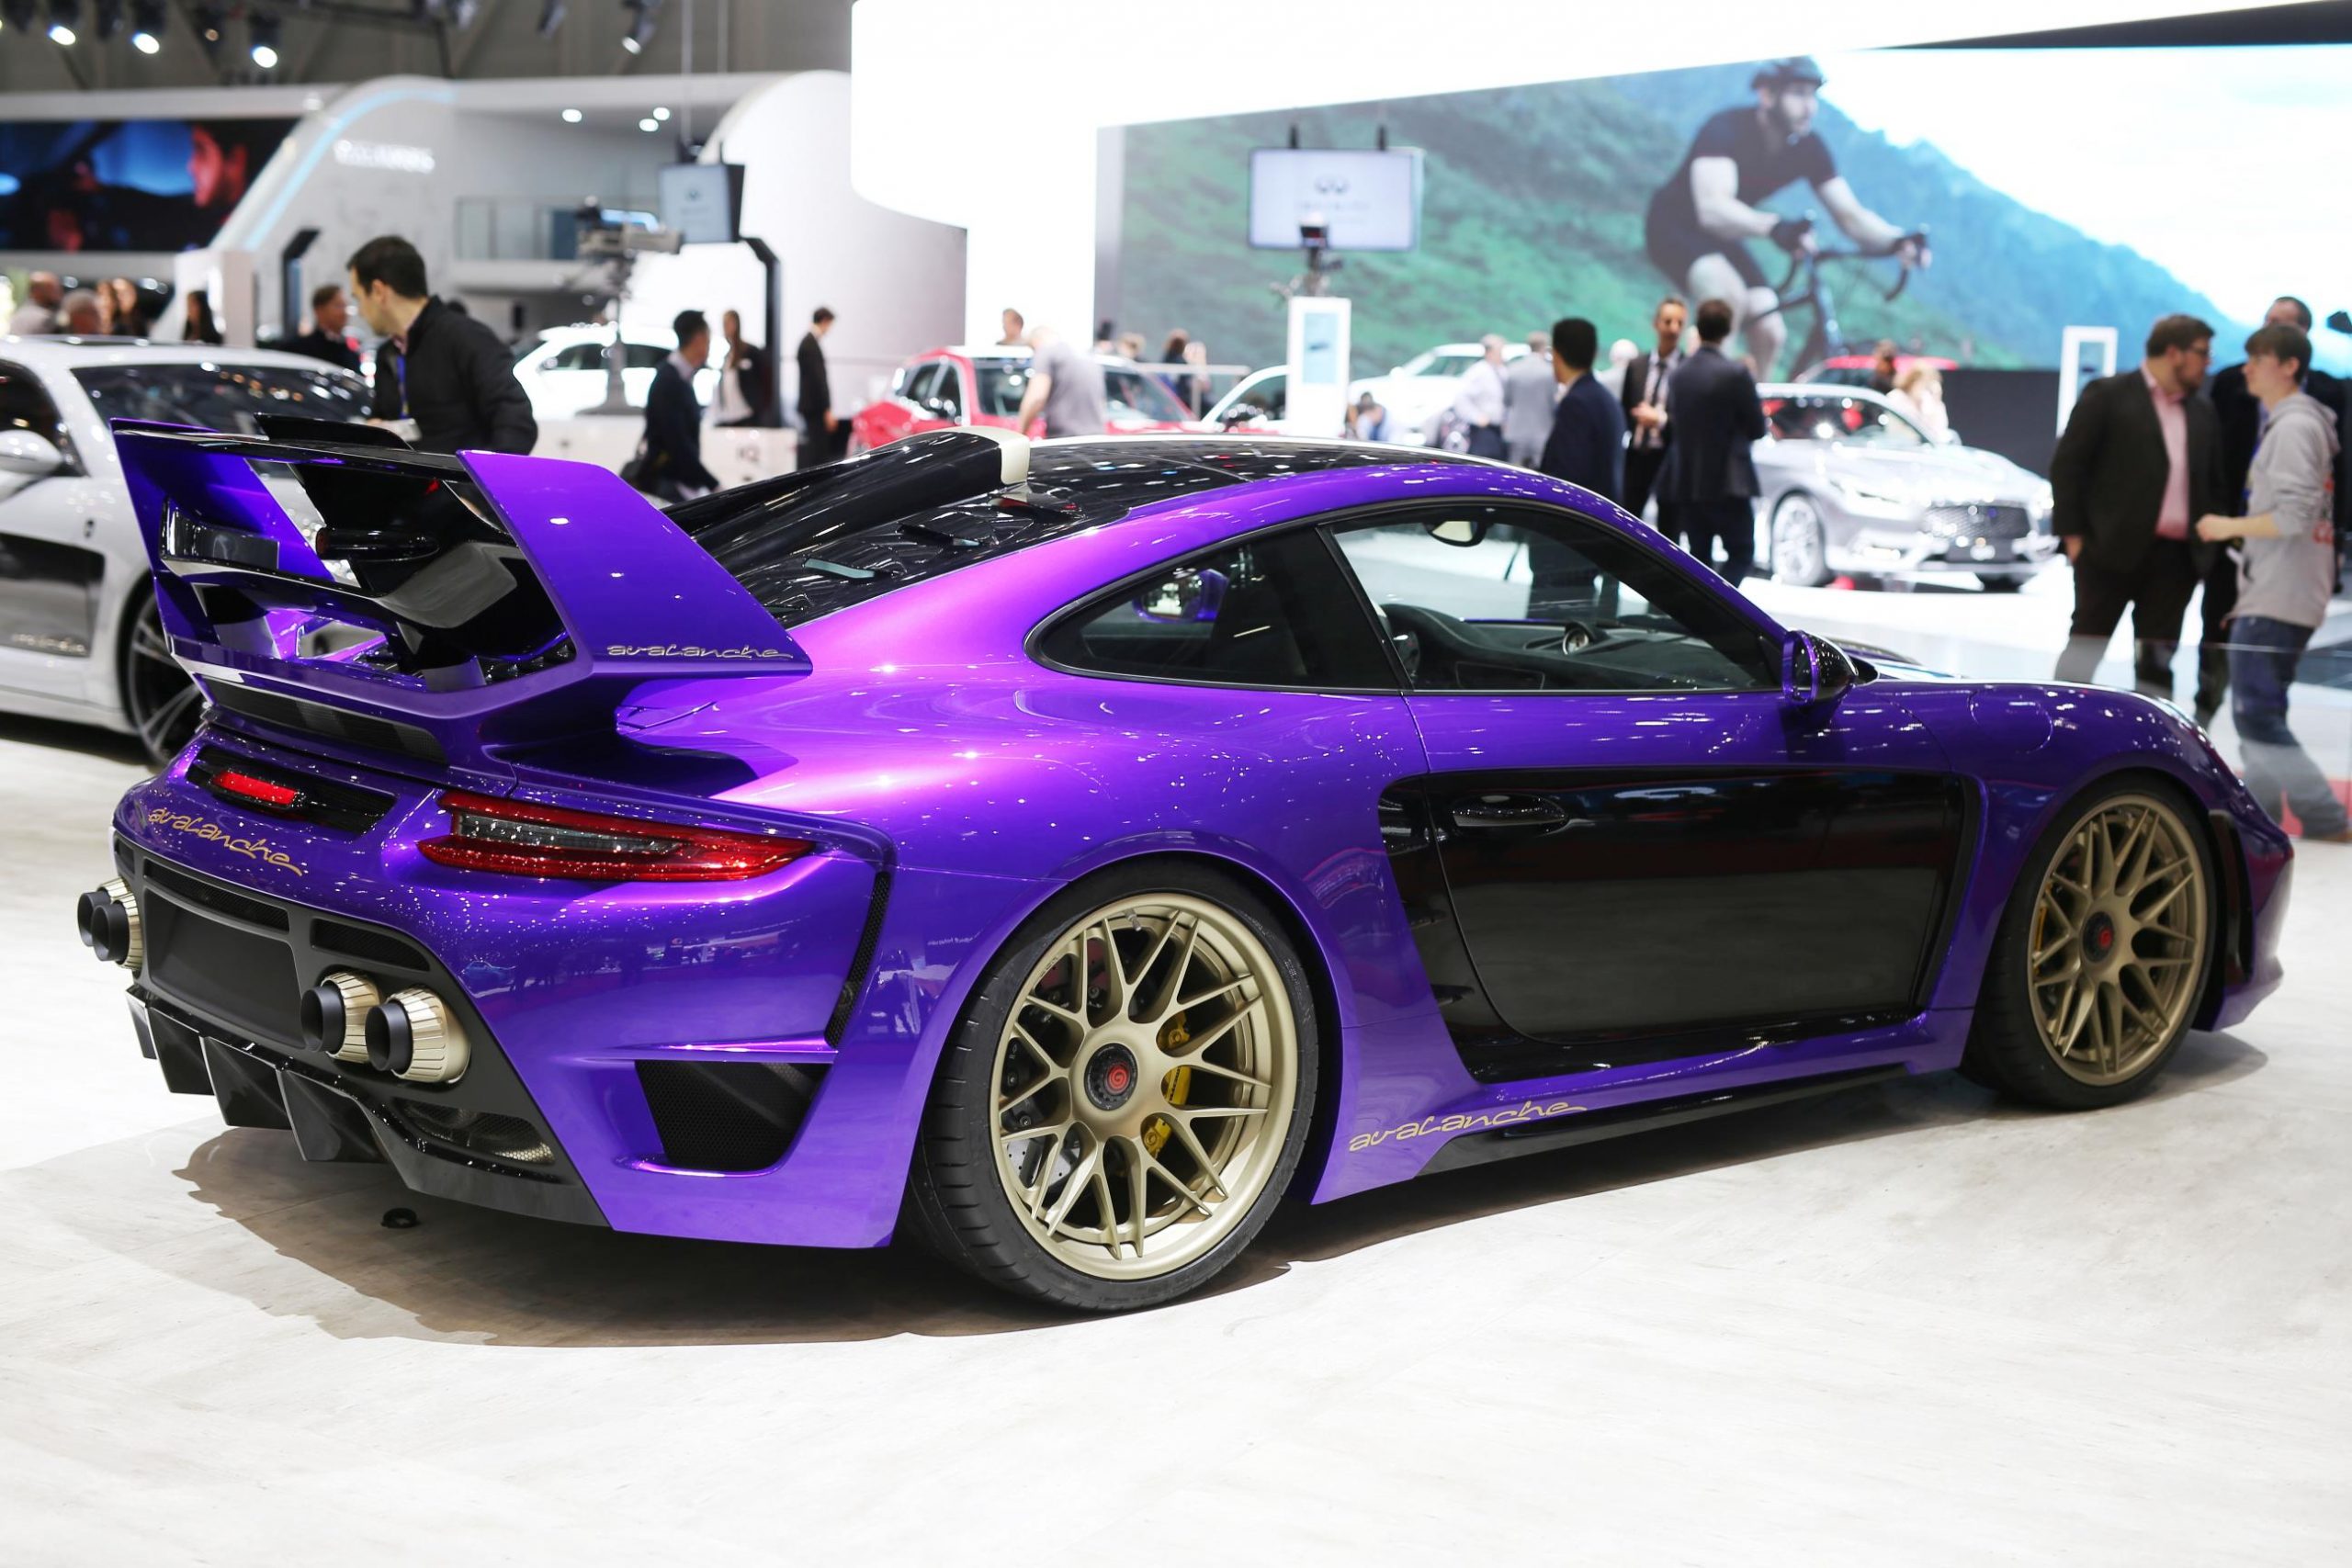 Gemballa Avalanche, Mistrale, Mirage GT wow at Geneva show